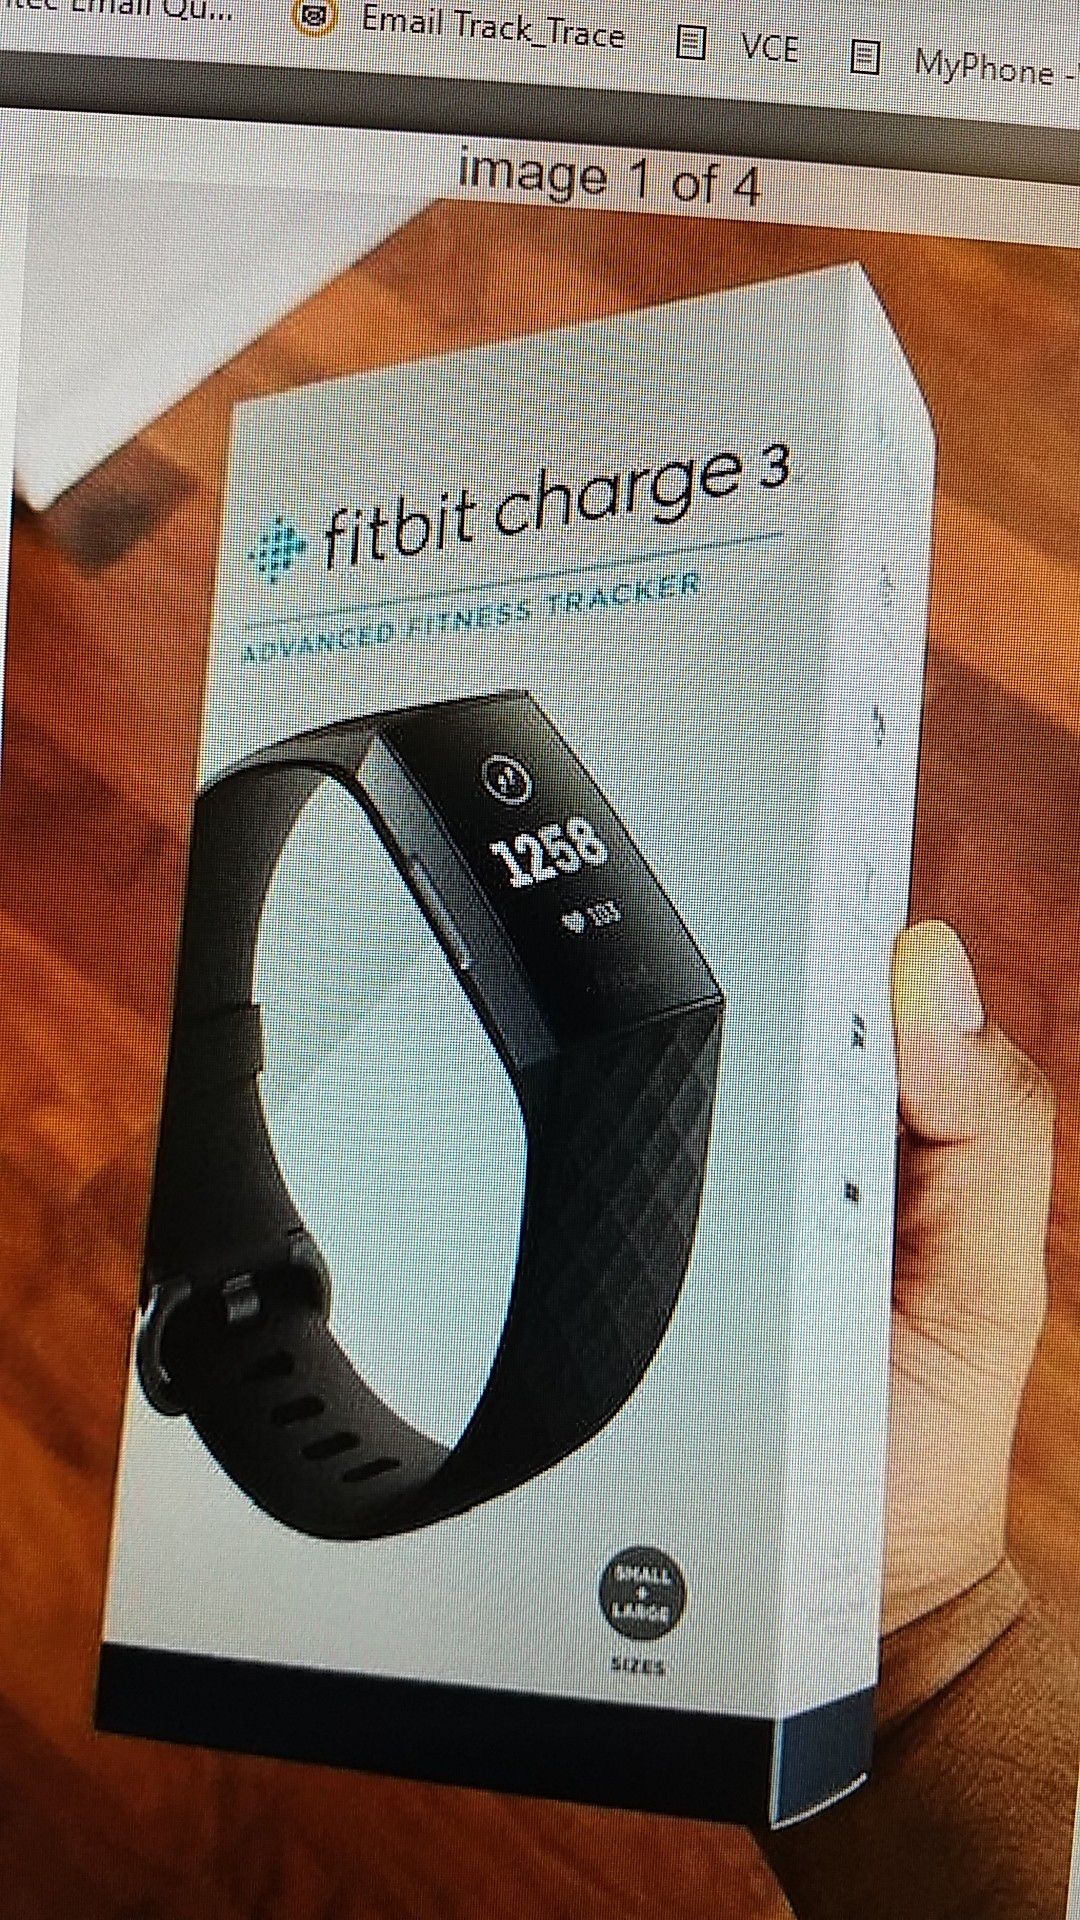 FitBit Charge 3_ Brand New, Sealed in Box